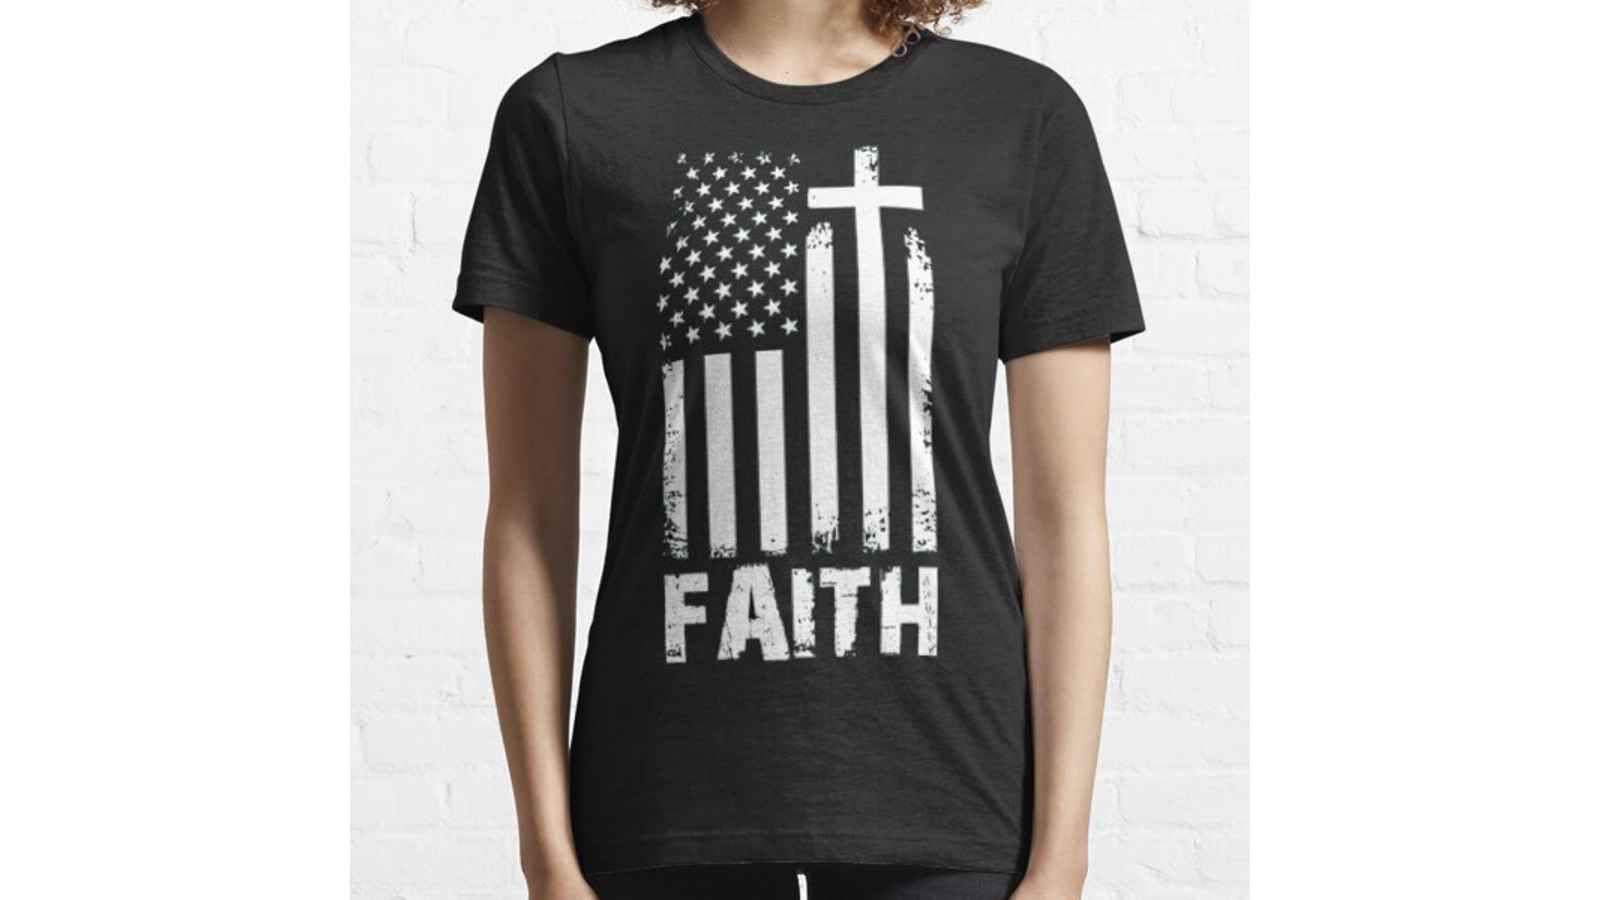 National Christian T-Shirt Day 2023: Date, History, Facts, Activities